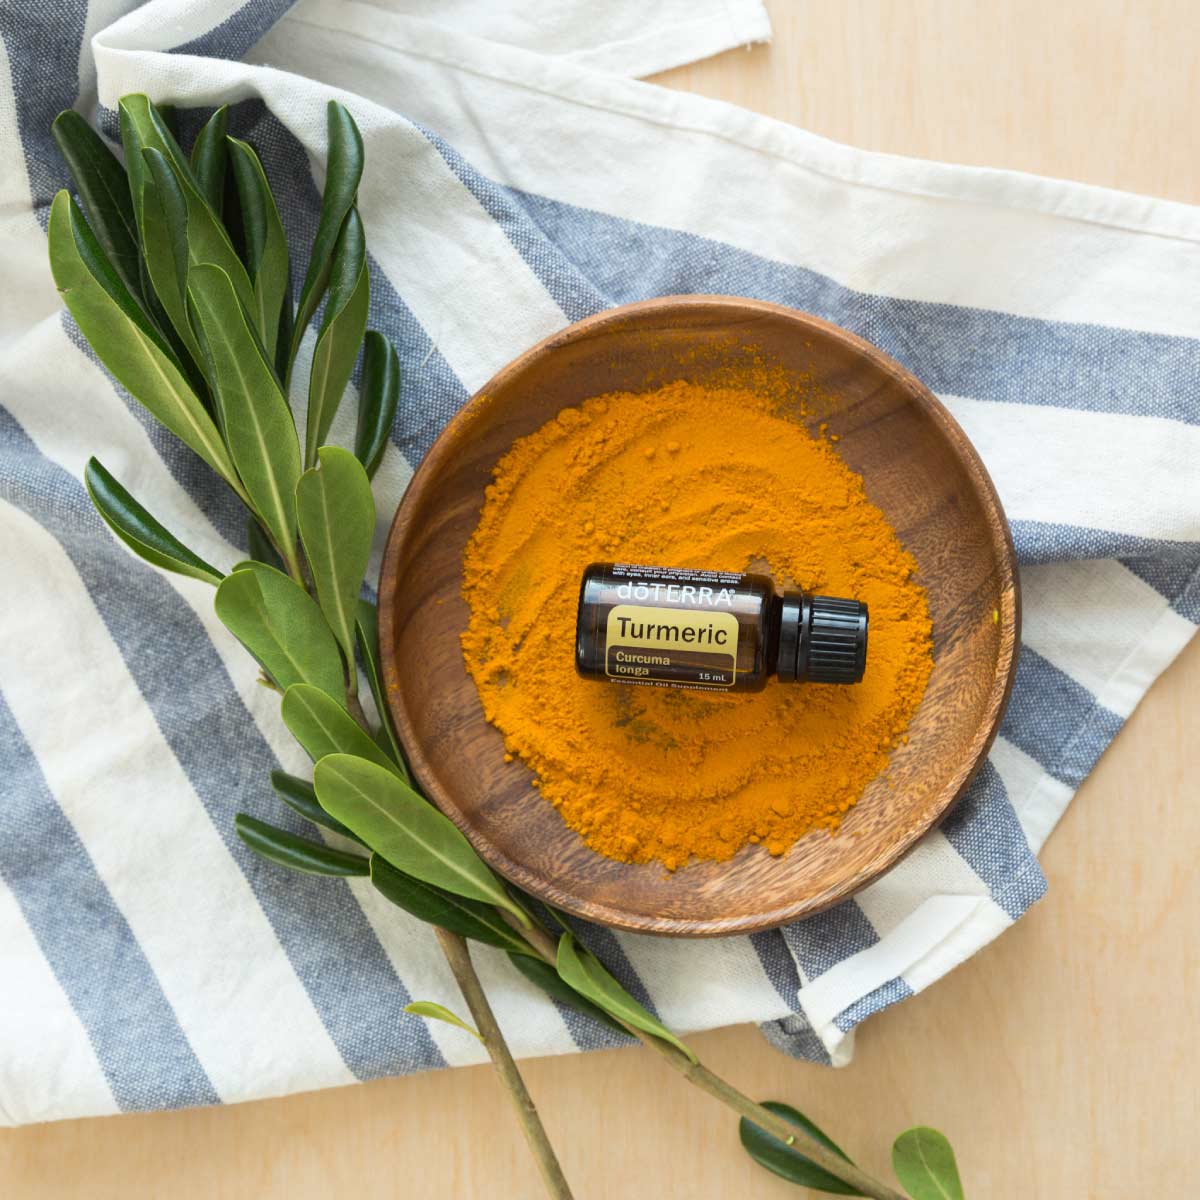 Bottle of doTERRA Turmeric oil surrounded by dry turmeric powder, a wooden dish, green leaves, and a blue striped dish towel. Does Turmeric essential oil have health benefits. When taken internally, Turmeric oil can support the nerv